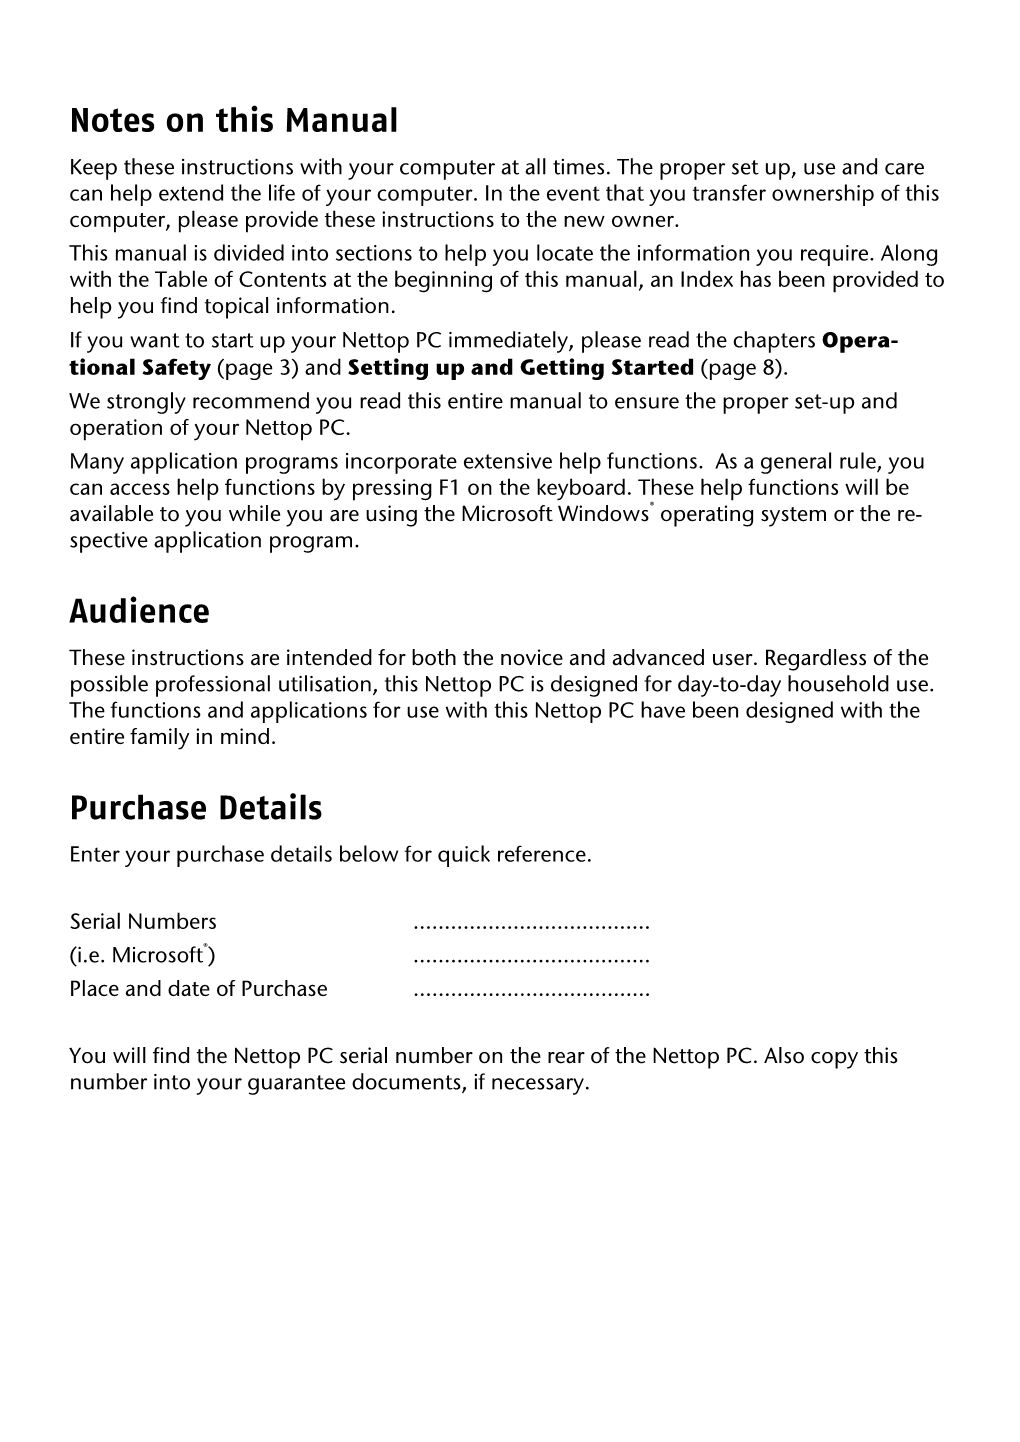 Notes on This Manual Audience Purchase Details